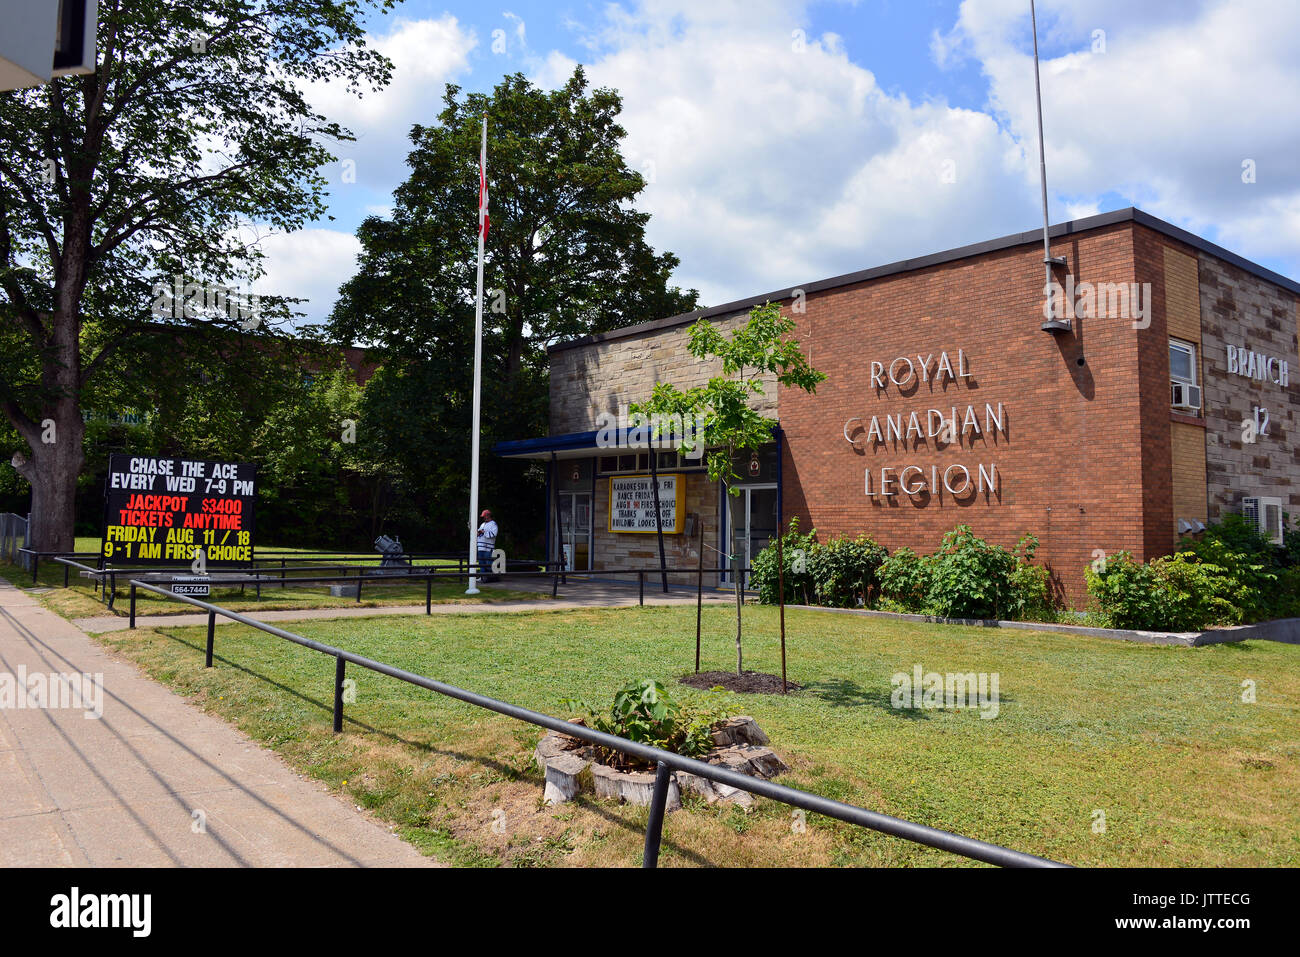 Sydney, Nova Scotia, Canada - August 4, 2017:  The Royal Canadian Legion on Dorchester Street with advertisement for Chase The Ace a fund raising Stock Photo